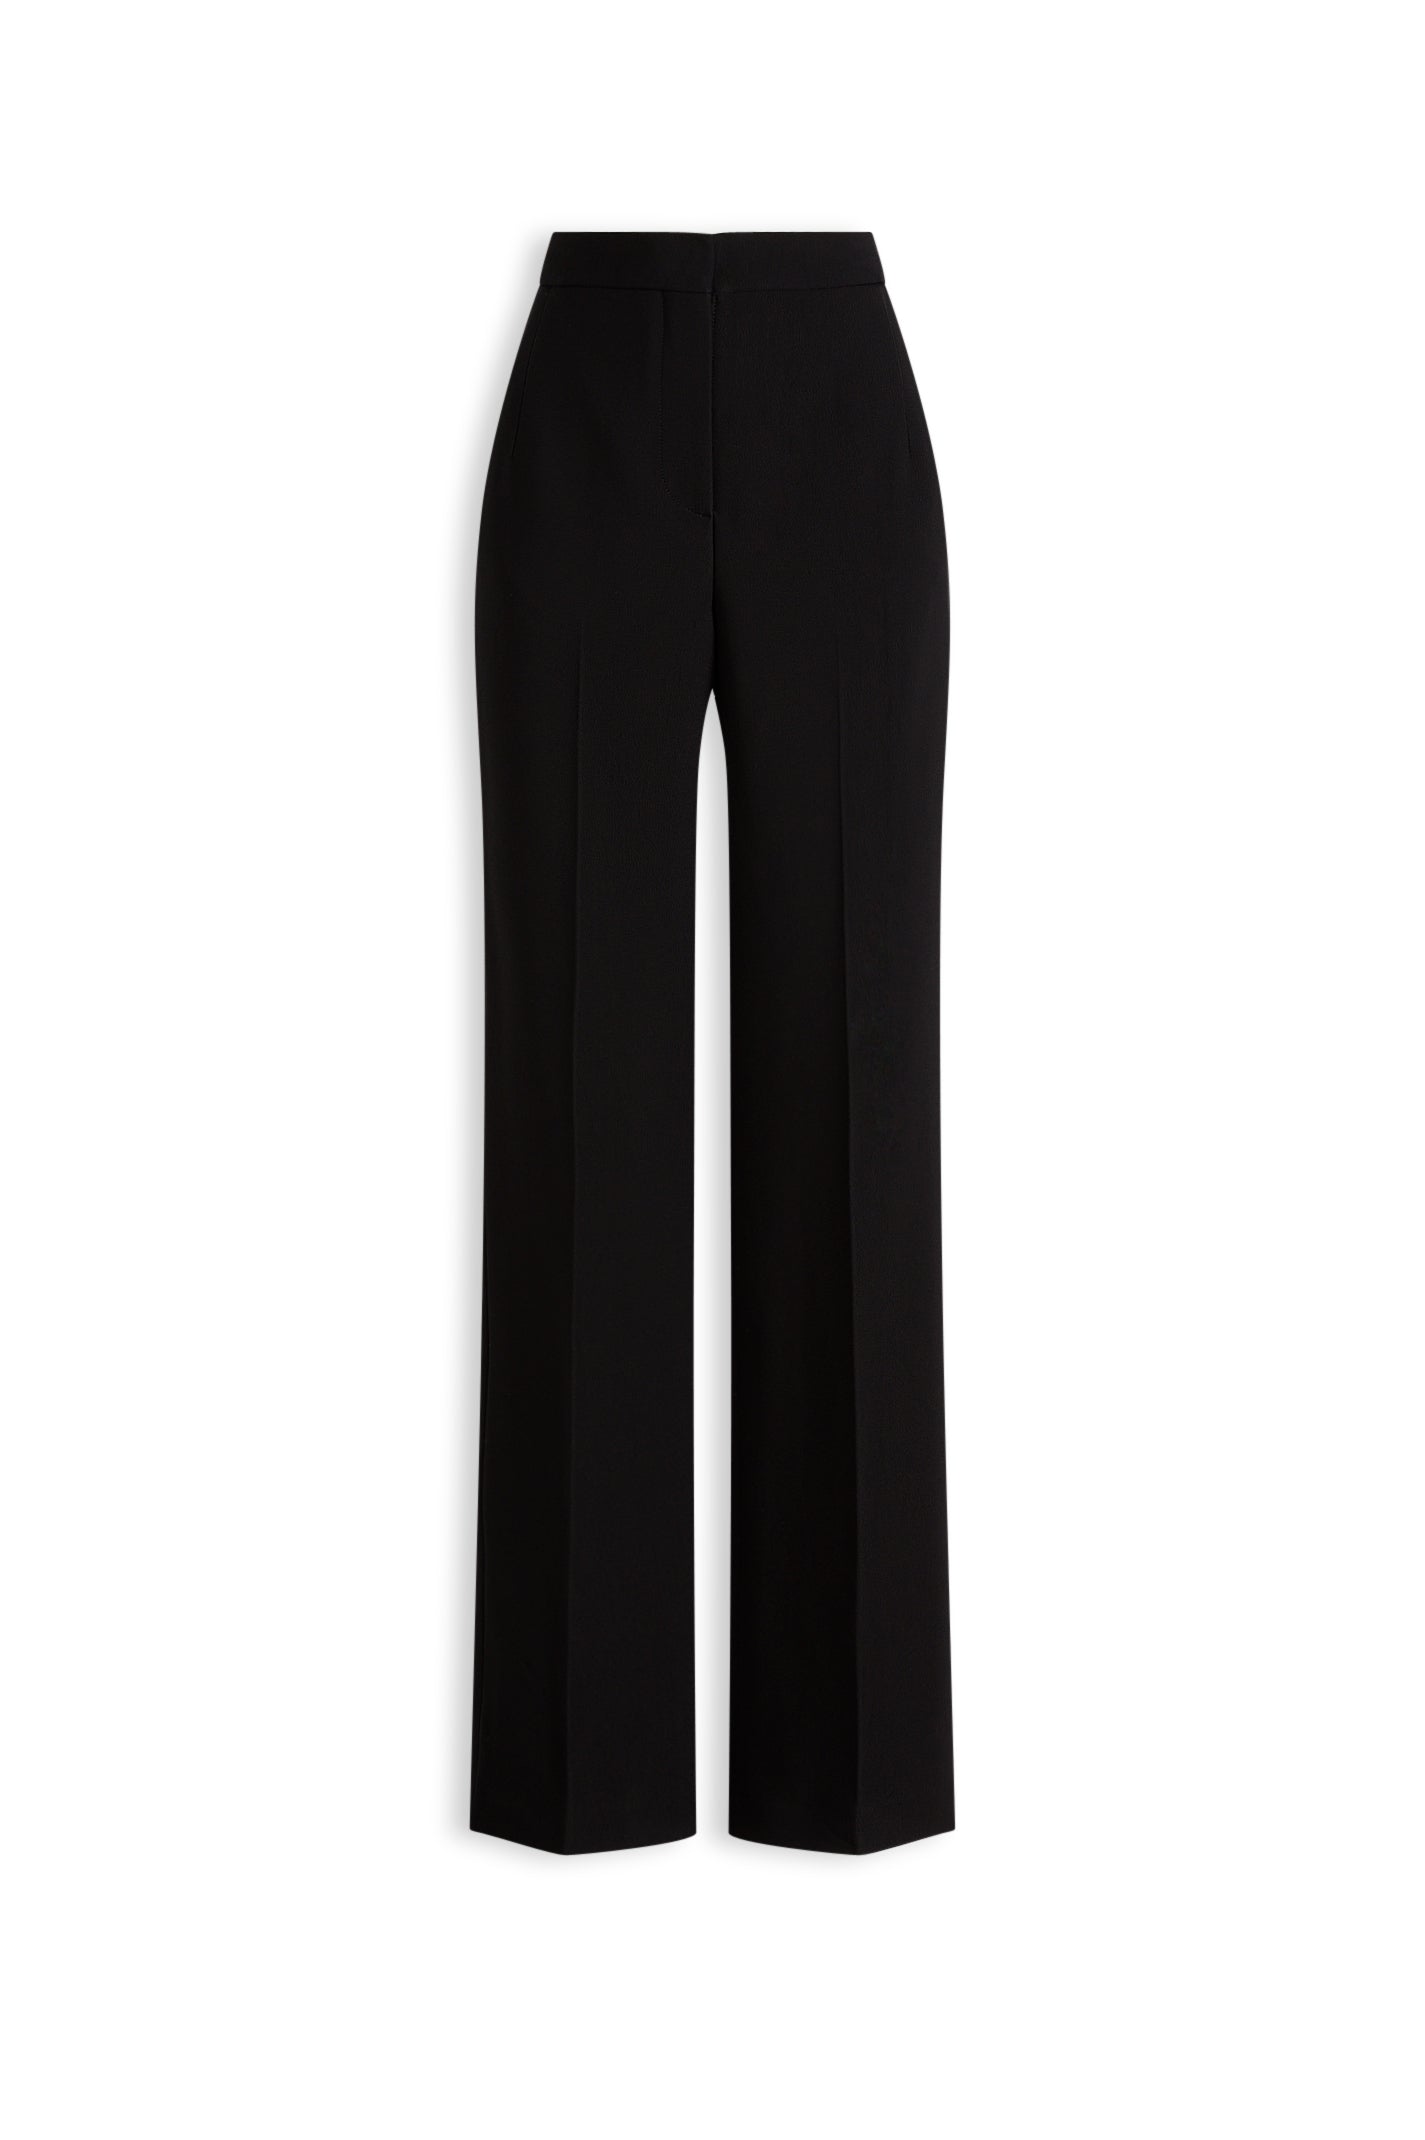 COUTURE TAILORED TROUSER - BLACK - Scanlan Theodore AU